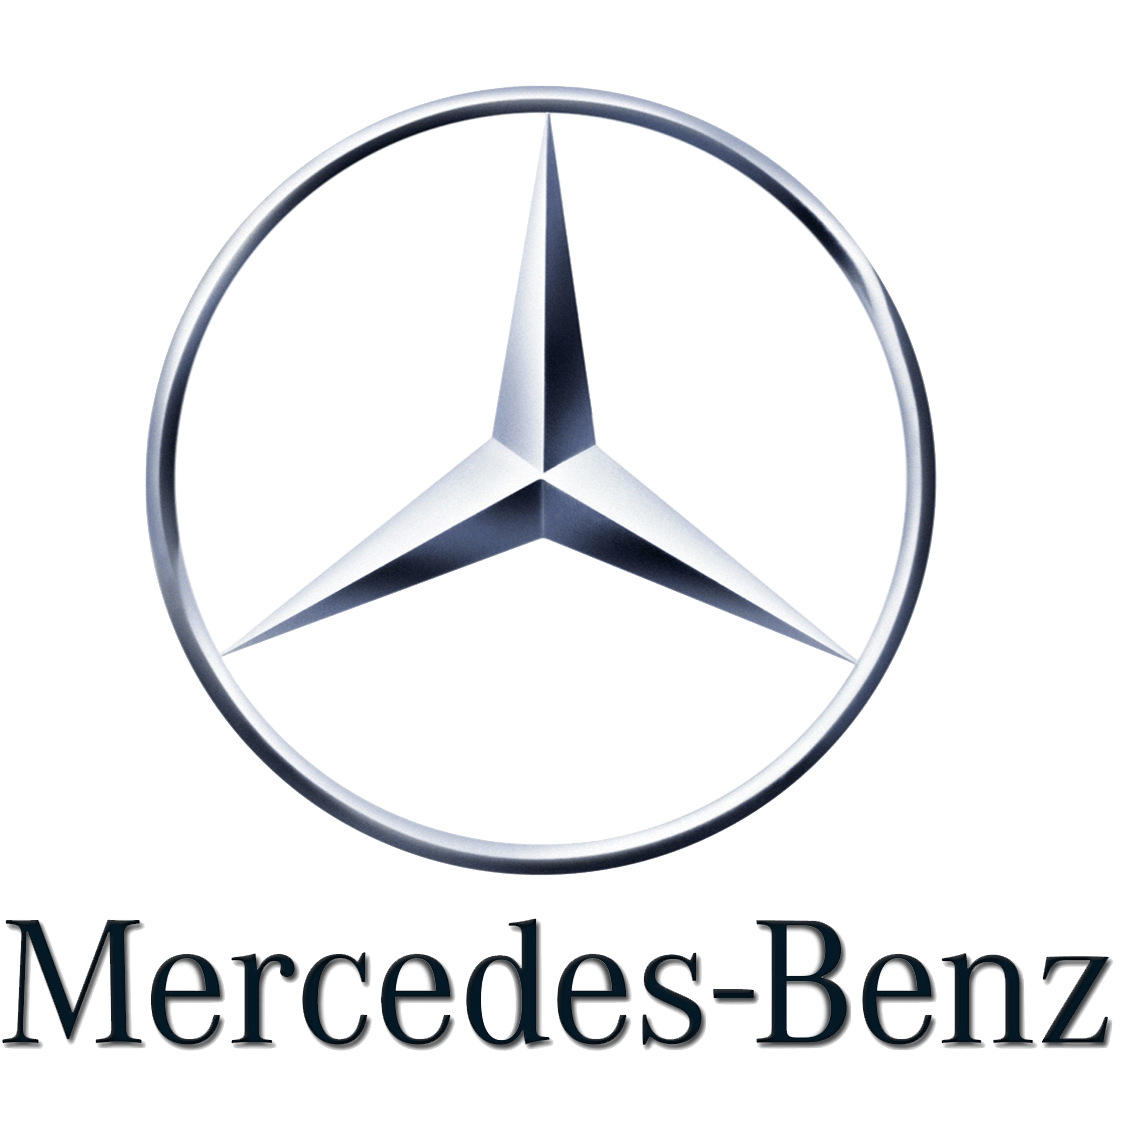 Small Mercedes Logo - Mercedes logos PNG image free download